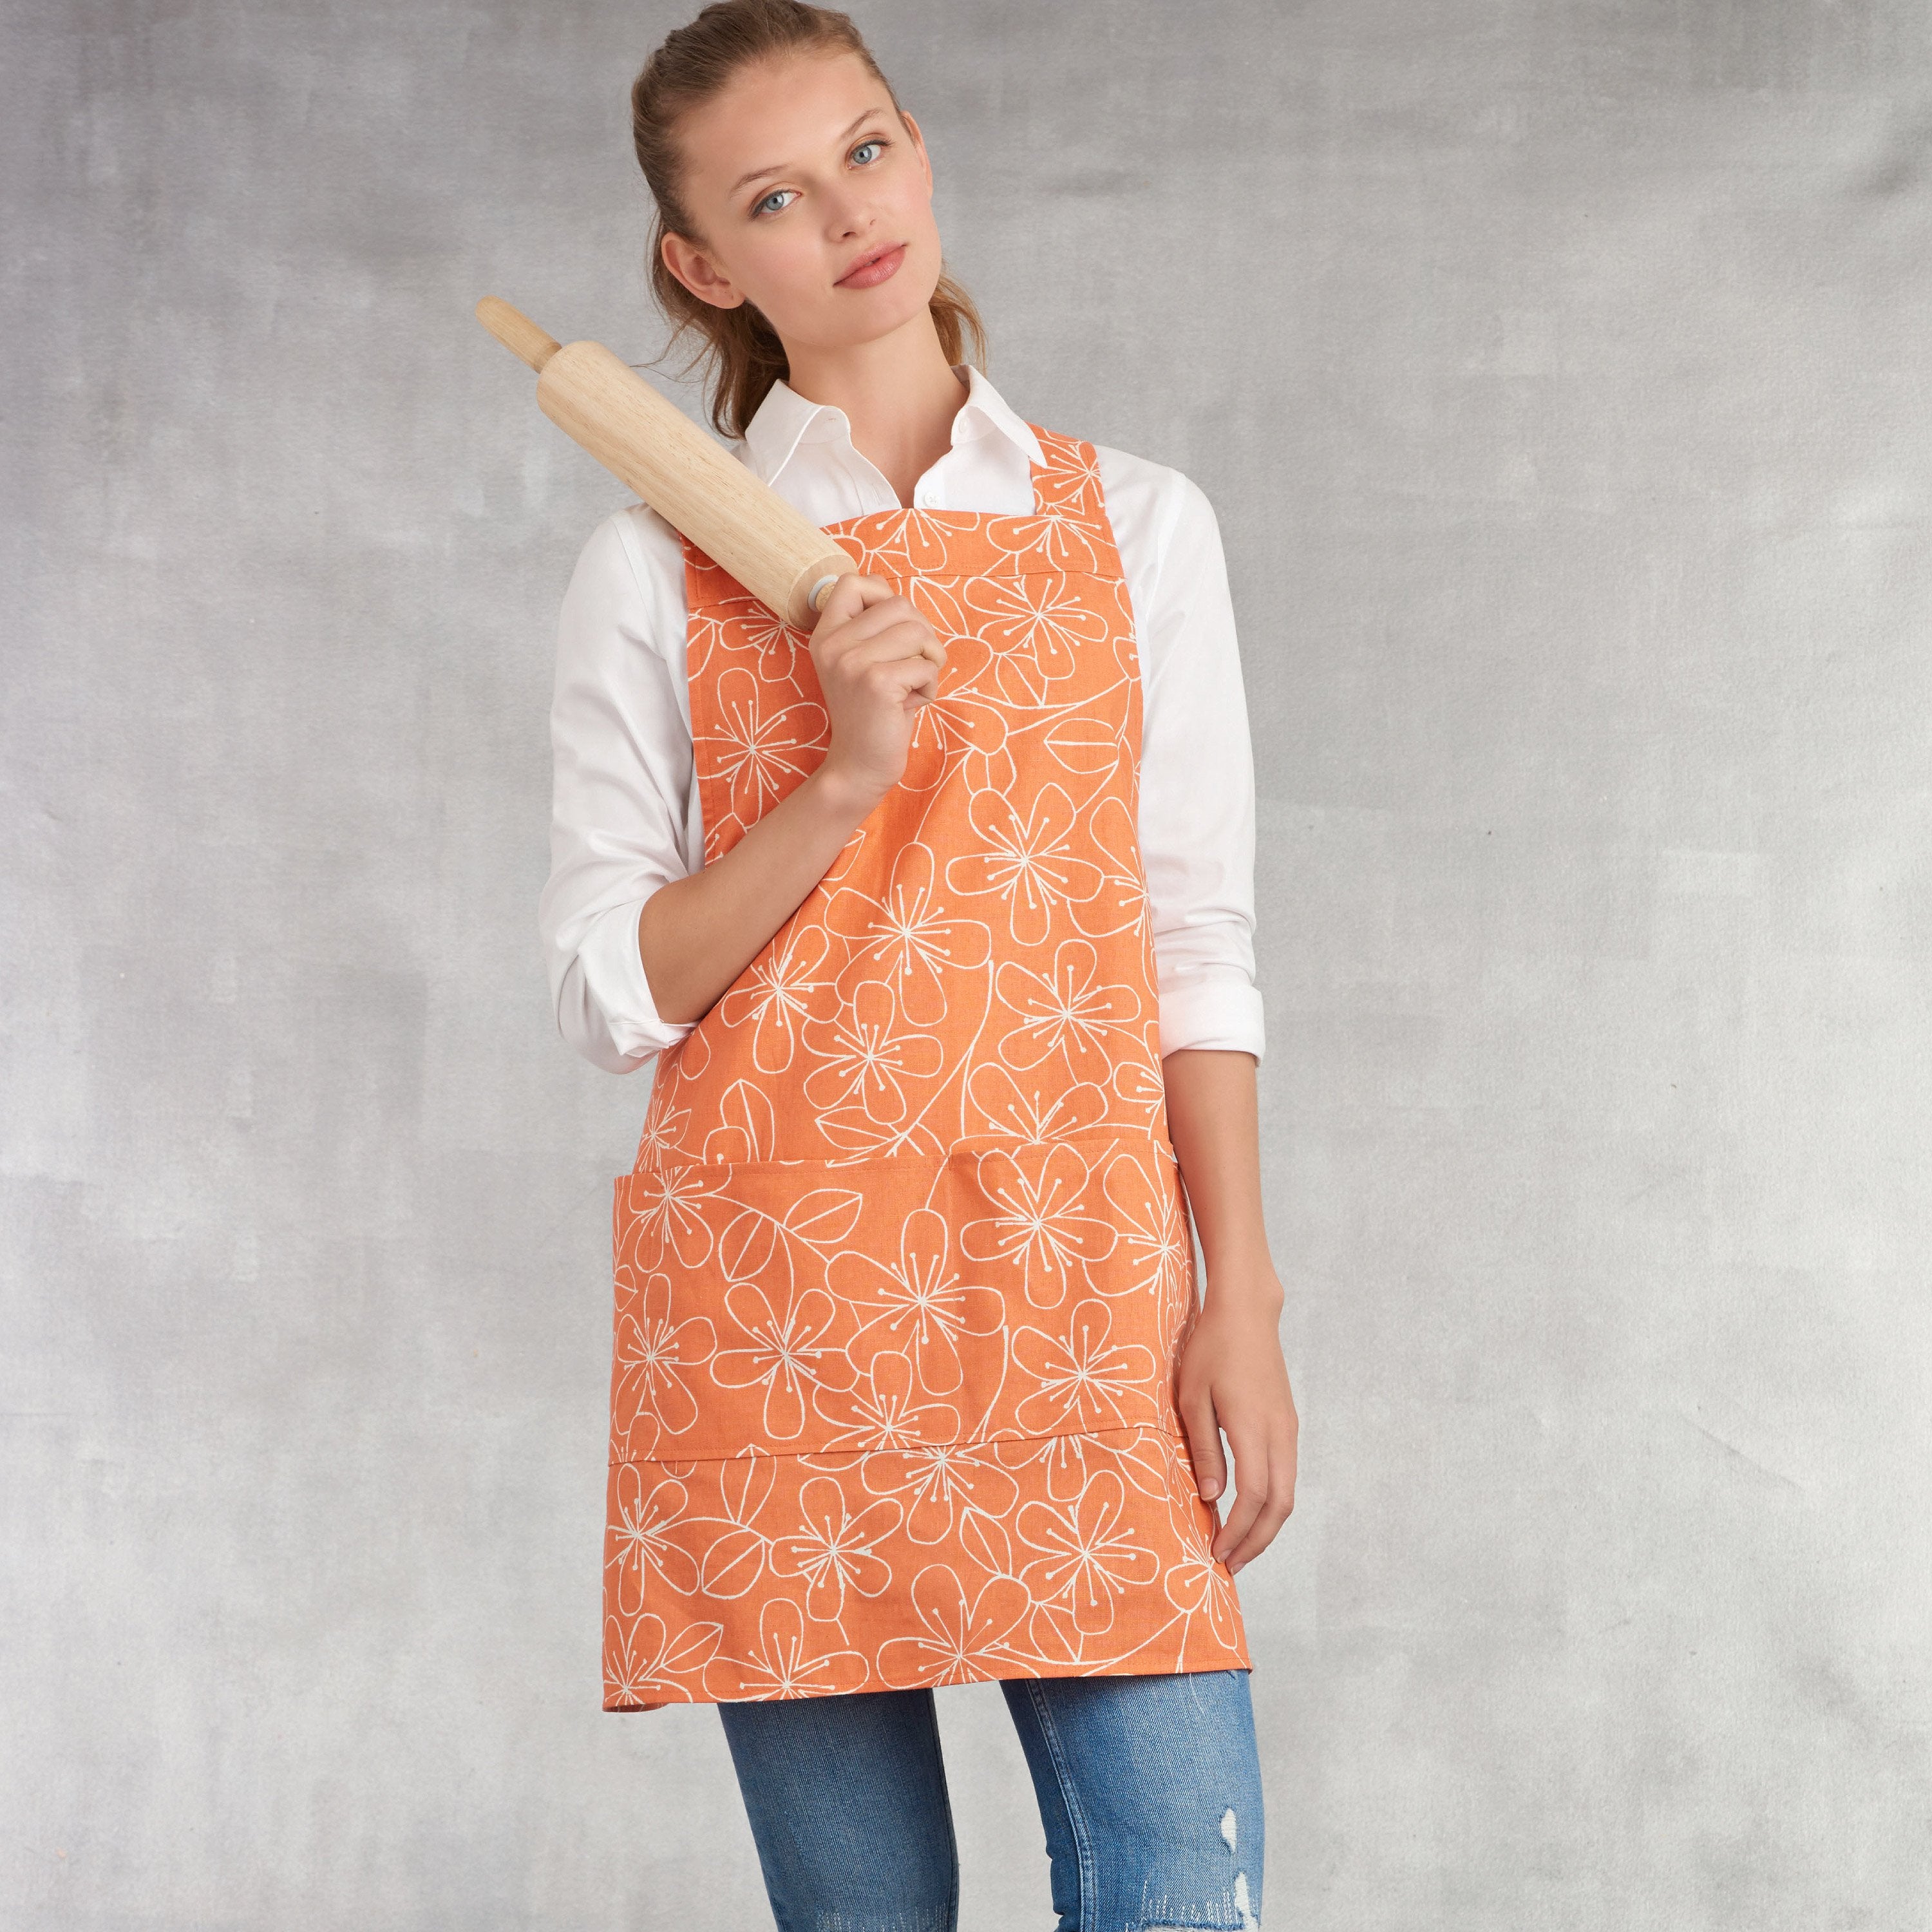 Simplicity Sewing Pattern 9409 Misses' Aprons from Jaycotts Sewing Supplies